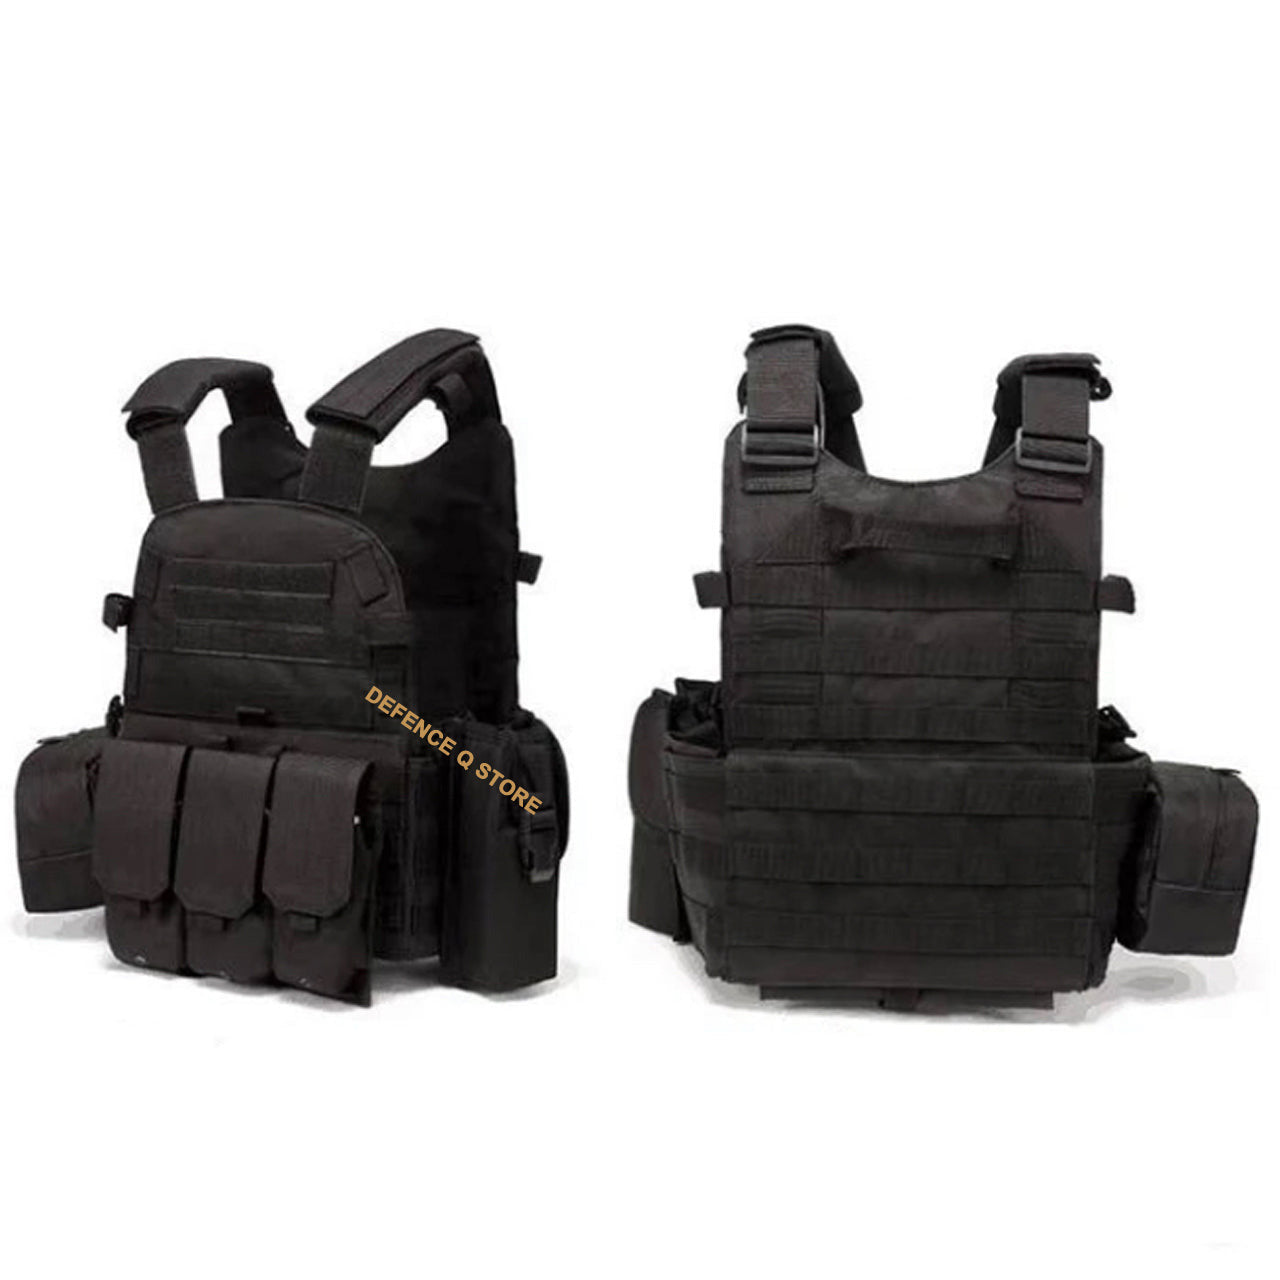 The Air Force Tactical Vest Lightweight Loadout Combination is crafted with premium 600D oxford material for superior durability. Its MOLLE design, featuring front and back compartments, allows for customization to match your aggressive combat style. www.defenceqstore.com.au